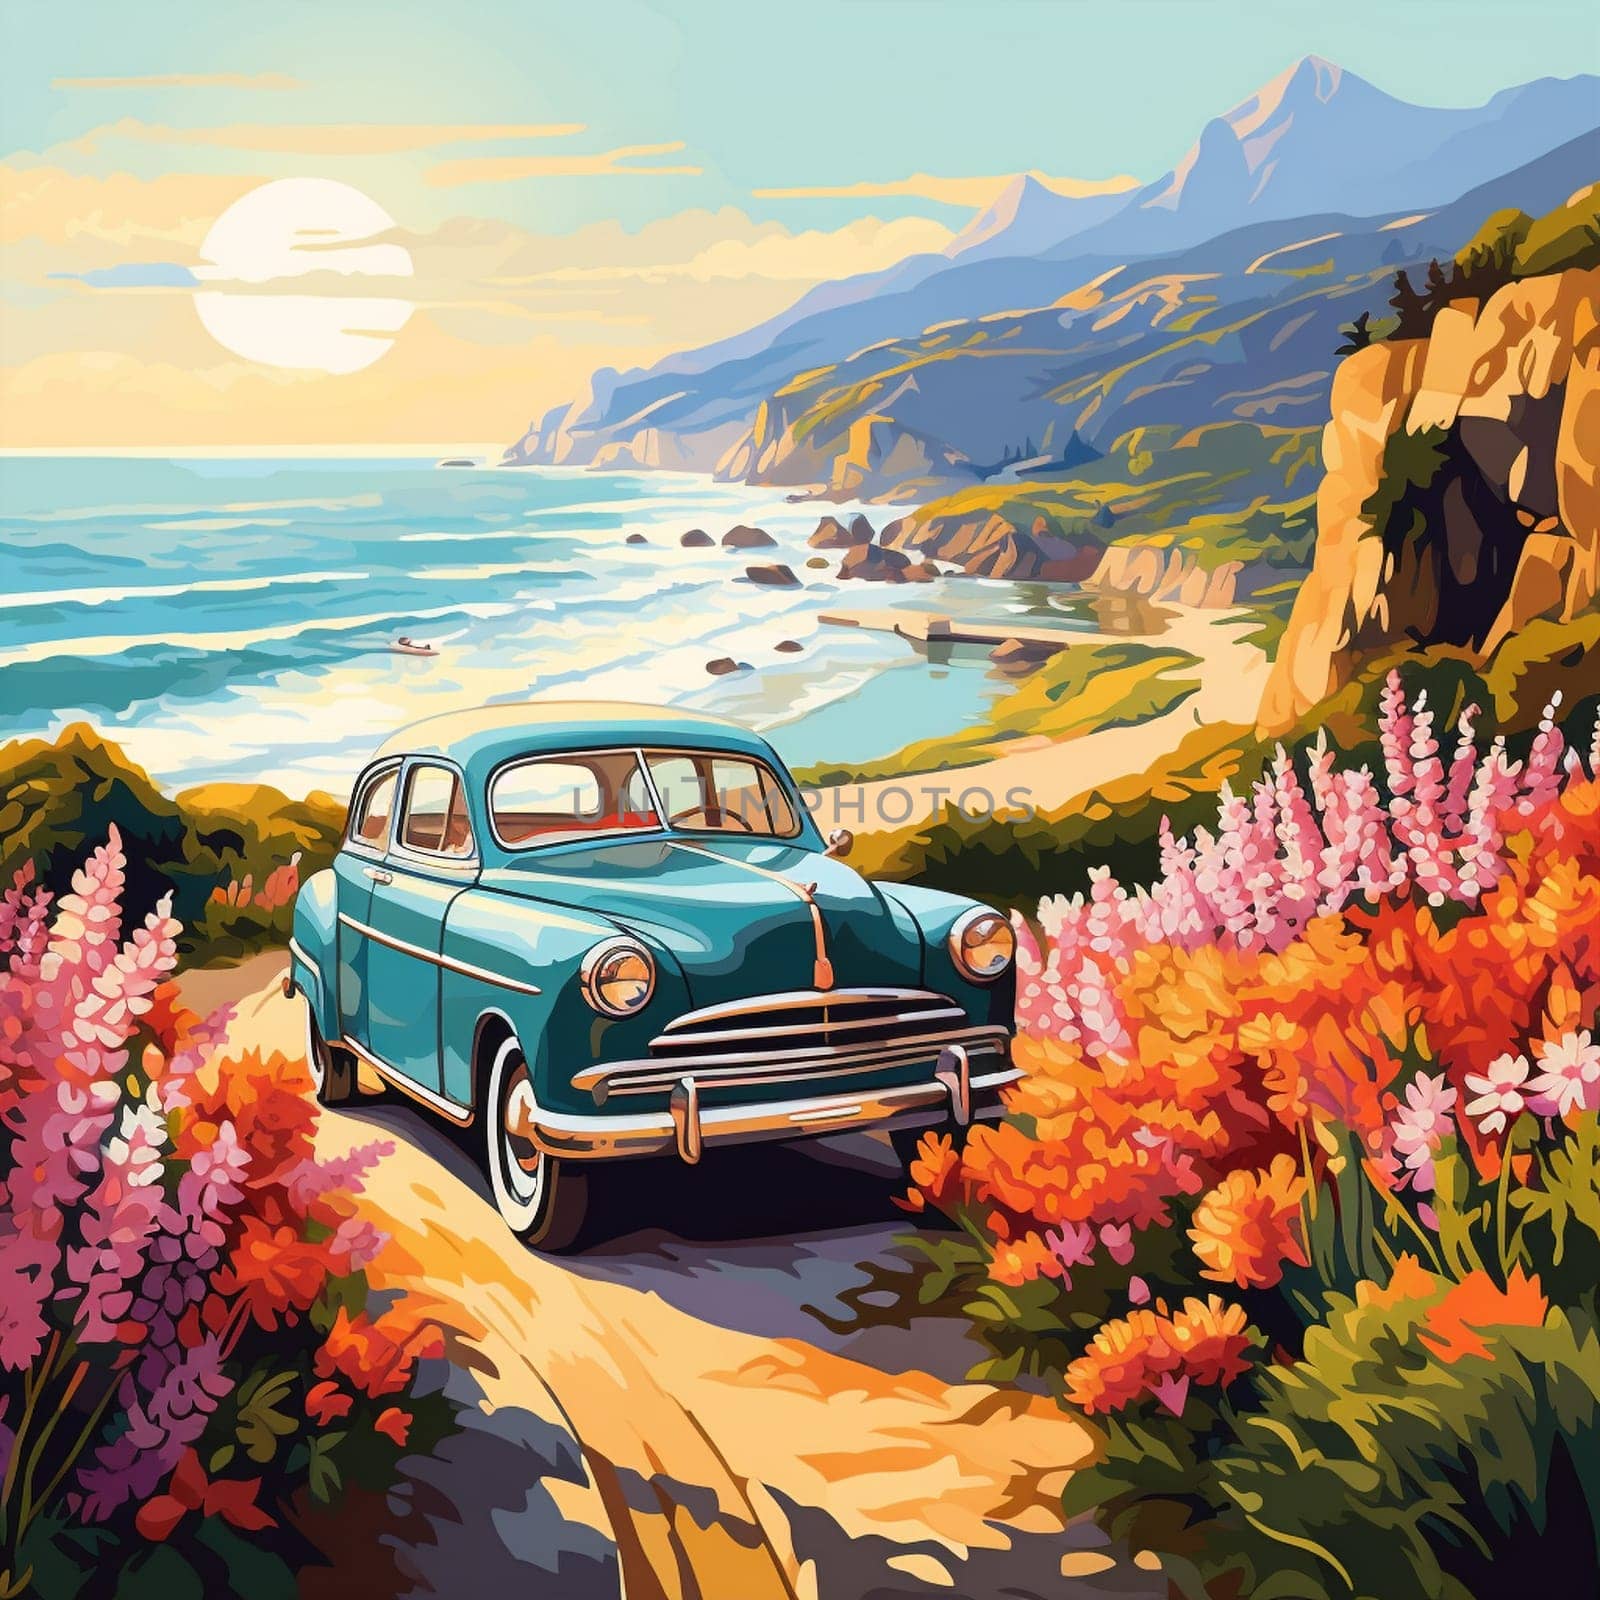 Vintage car adorned with colorful flower decals, driving down a sunlit coastal road by Sahin